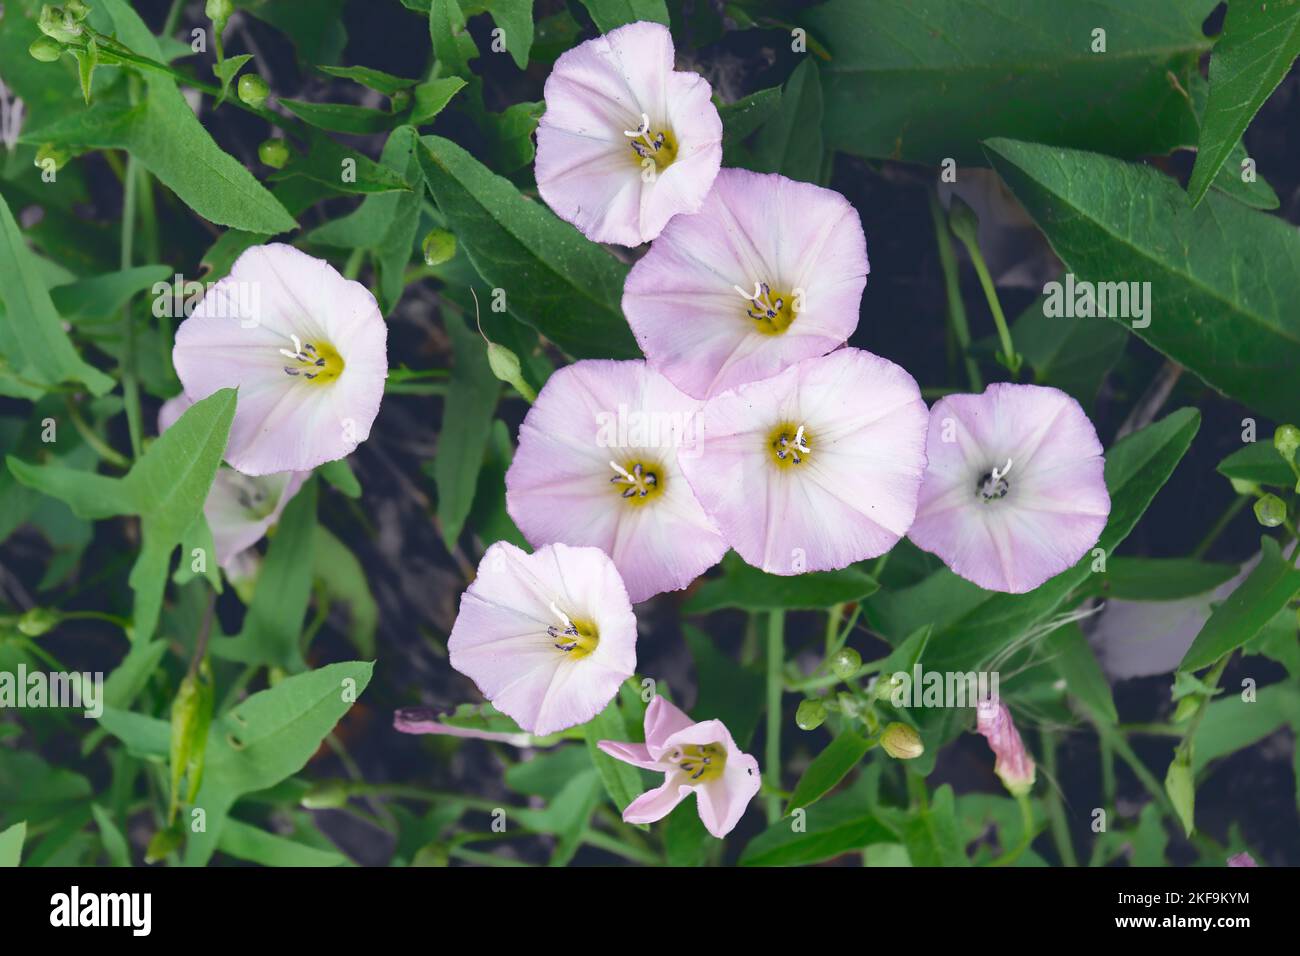 Field bindweed or Convolvulus arvensis or European bindweed or Creeping Jenny or Possession vine herbaceous perennial plant with open flowers surround Stock Photo